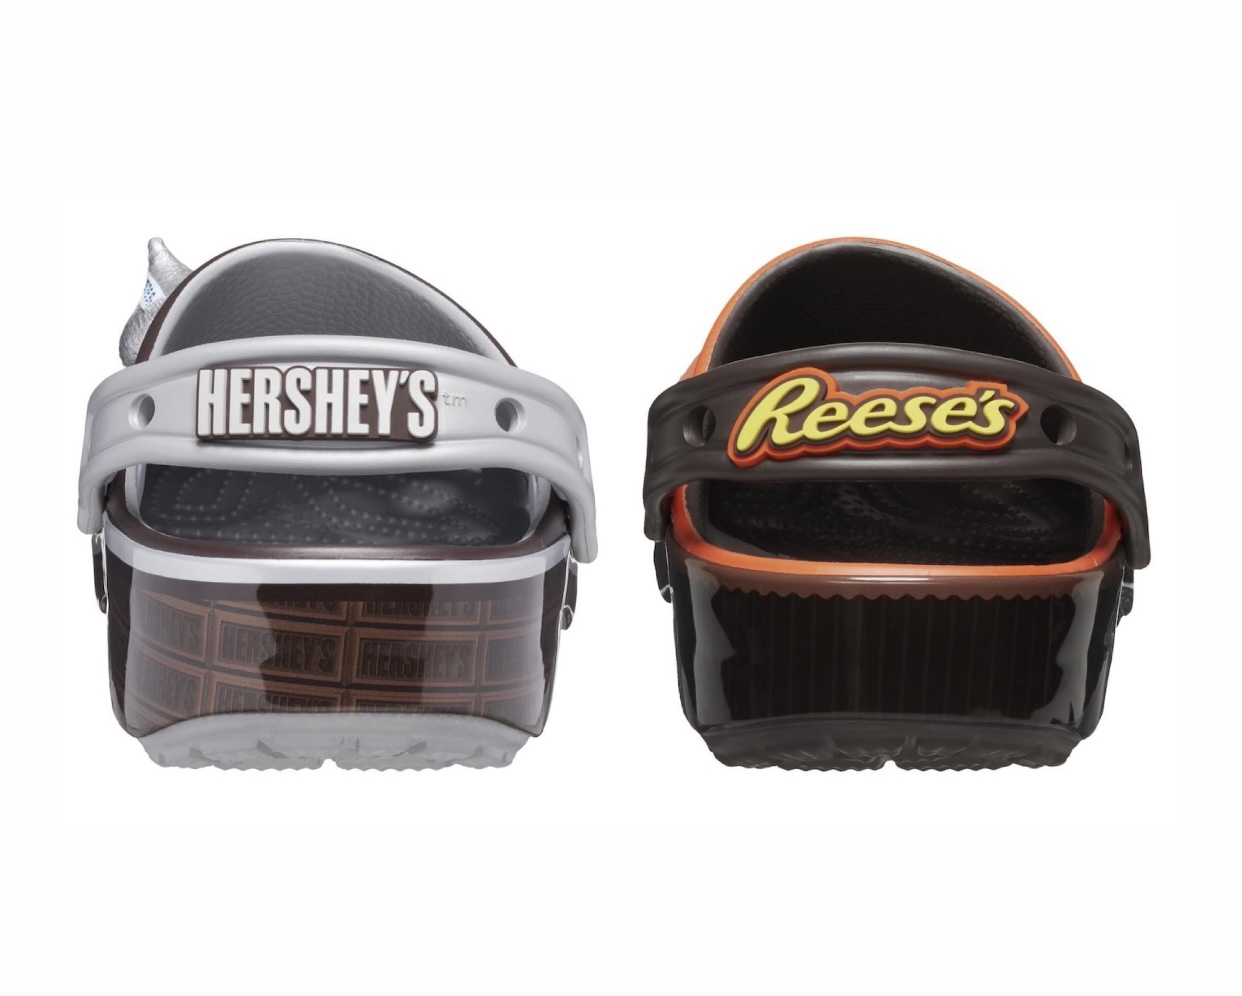 Hershey’s x Crocs Classic Clog Pack Now Available